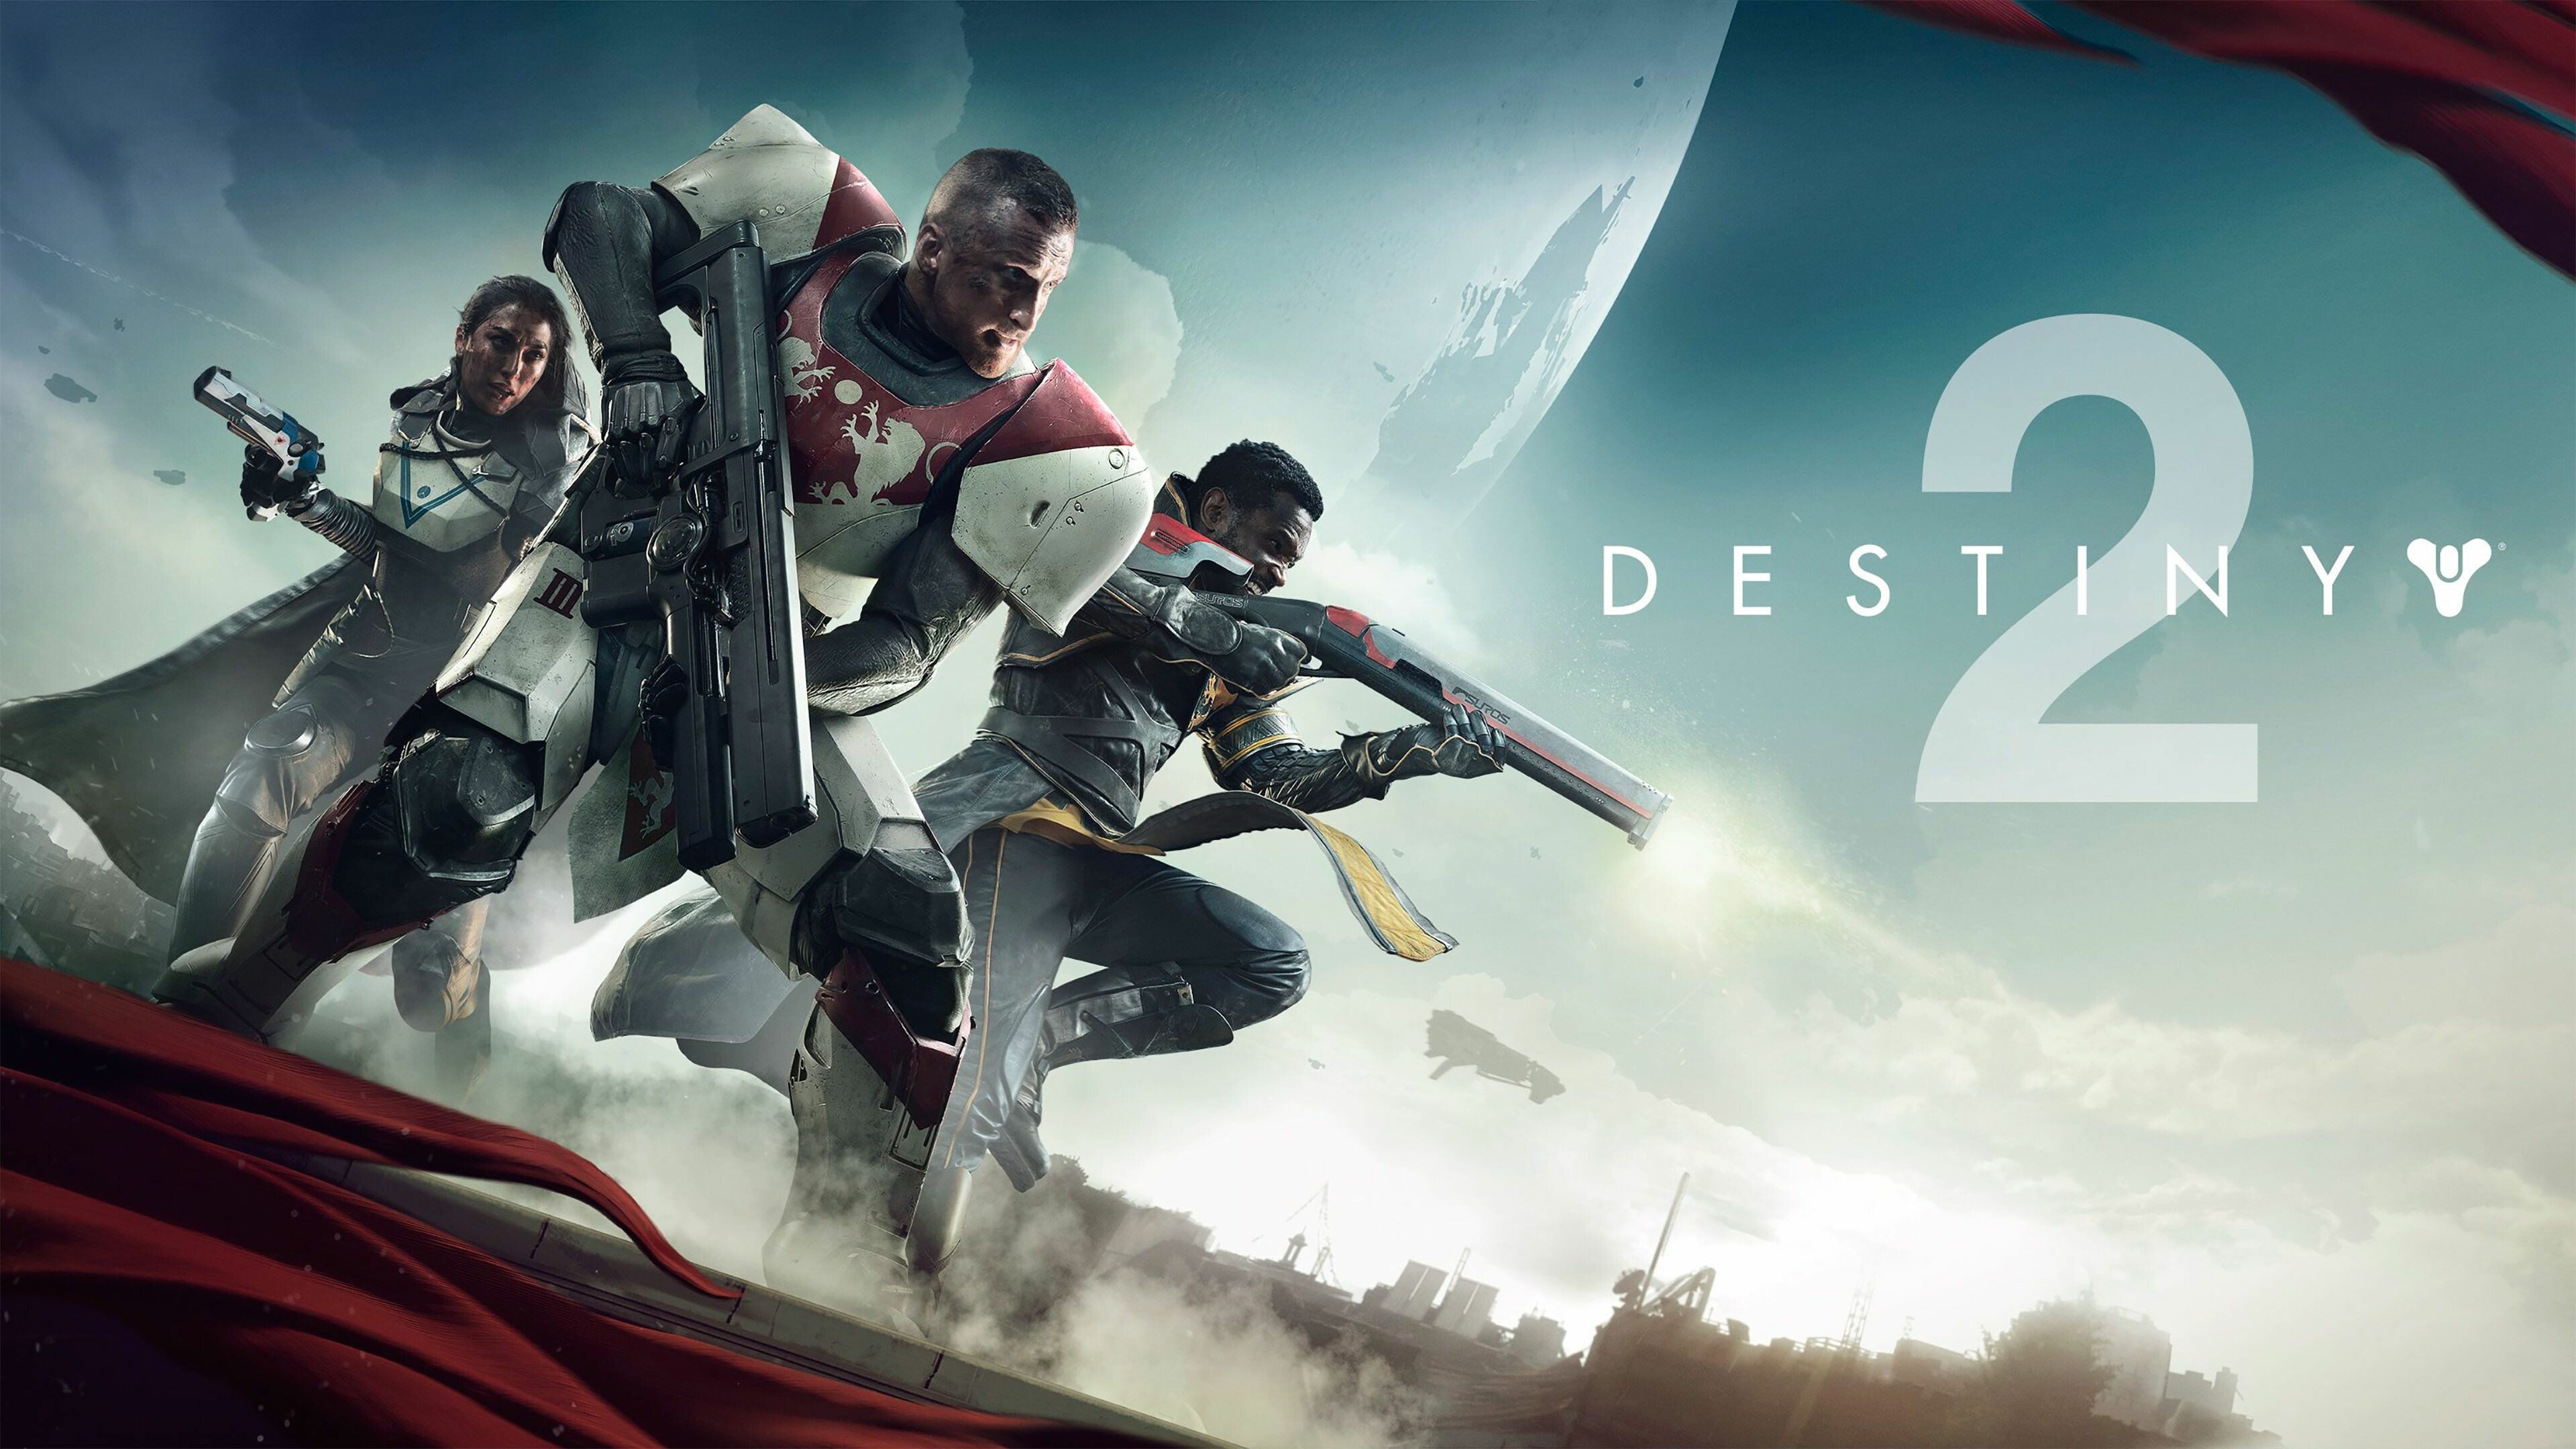 Destiny: An online-only multiplayer first-person shooter video game developed by Bungie and previously published by Activision. 3840x2160 4K Wallpaper.